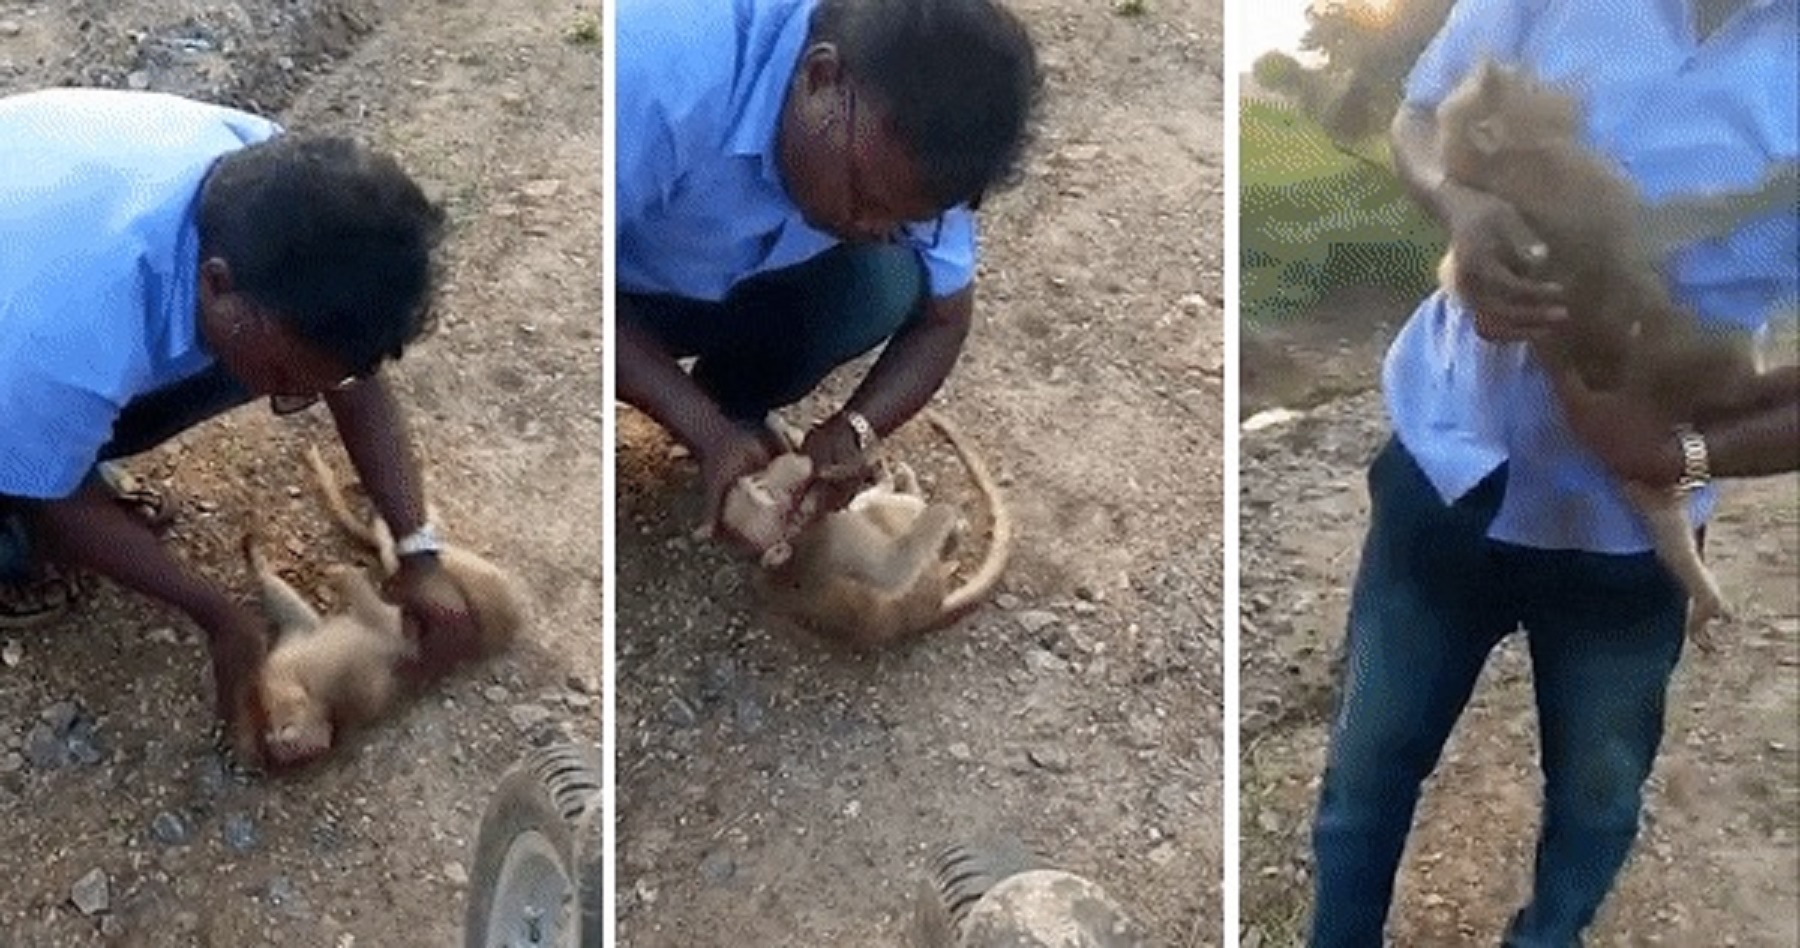 Watch: Emotional Video As Man Performs CPR On Dying Monkey To Save Its Life